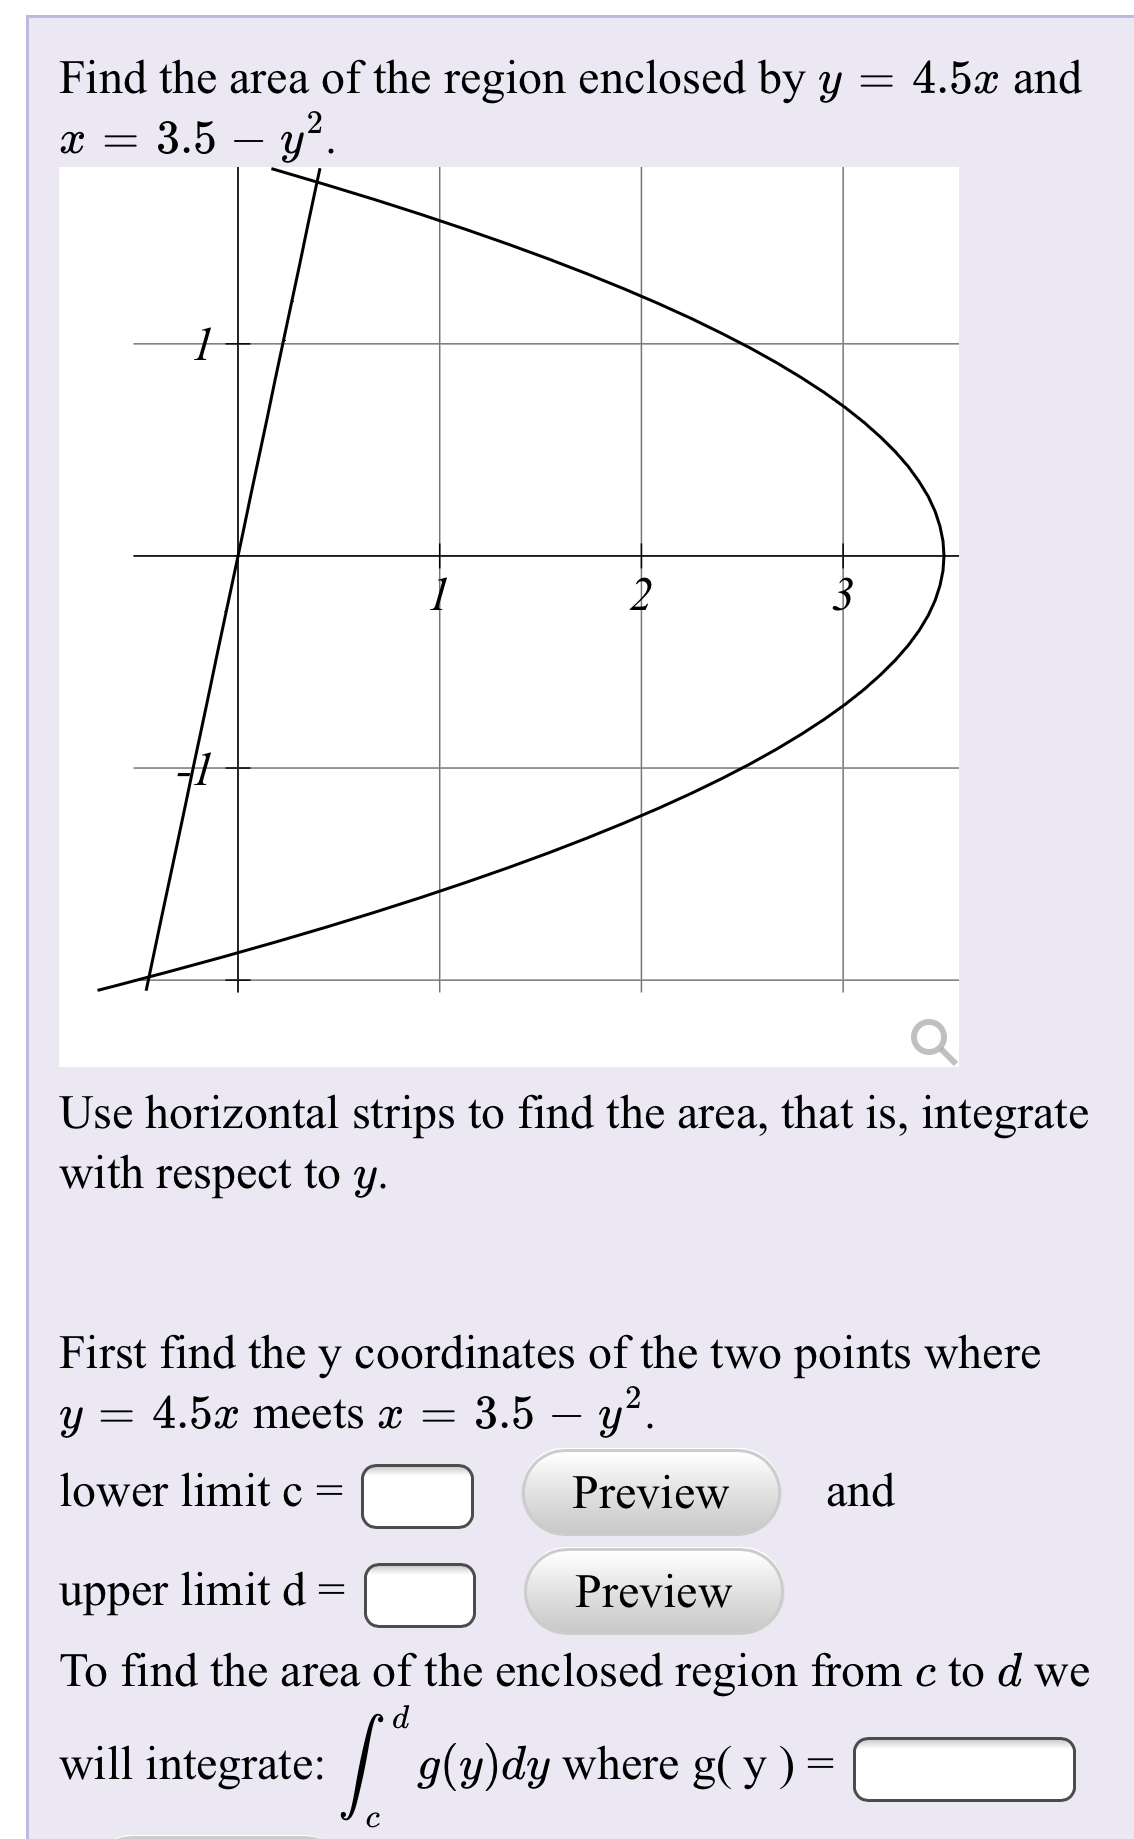 Find the area of the region enclosed by y =
4.5x and
х — 3.5 — у"
-
2
3
Use horizontal strips to find the area, that is, integrate
with respect to y.
First find the y coordinates of the two points where
y = 4.5x meets x = 3.5 – y².
-
lower limit c =
Preview
and
upper limit d =
Preview
To find the area of the enclosed region from c to d we
will integrate:
| g(y)dy where g( y ) =
